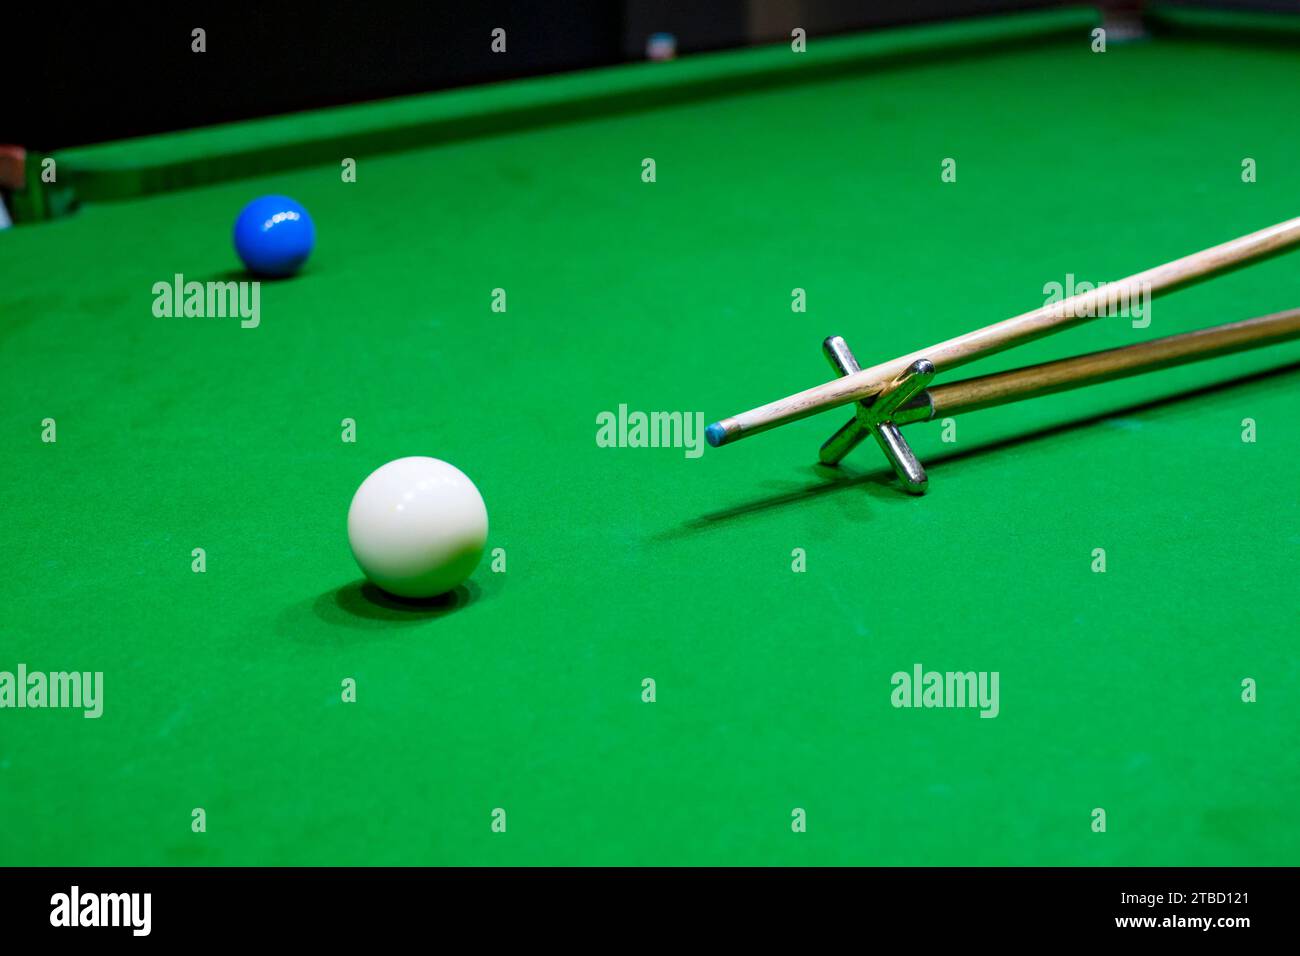 Snooker table. Aiming the cue ball with spider stick. Foto Stock